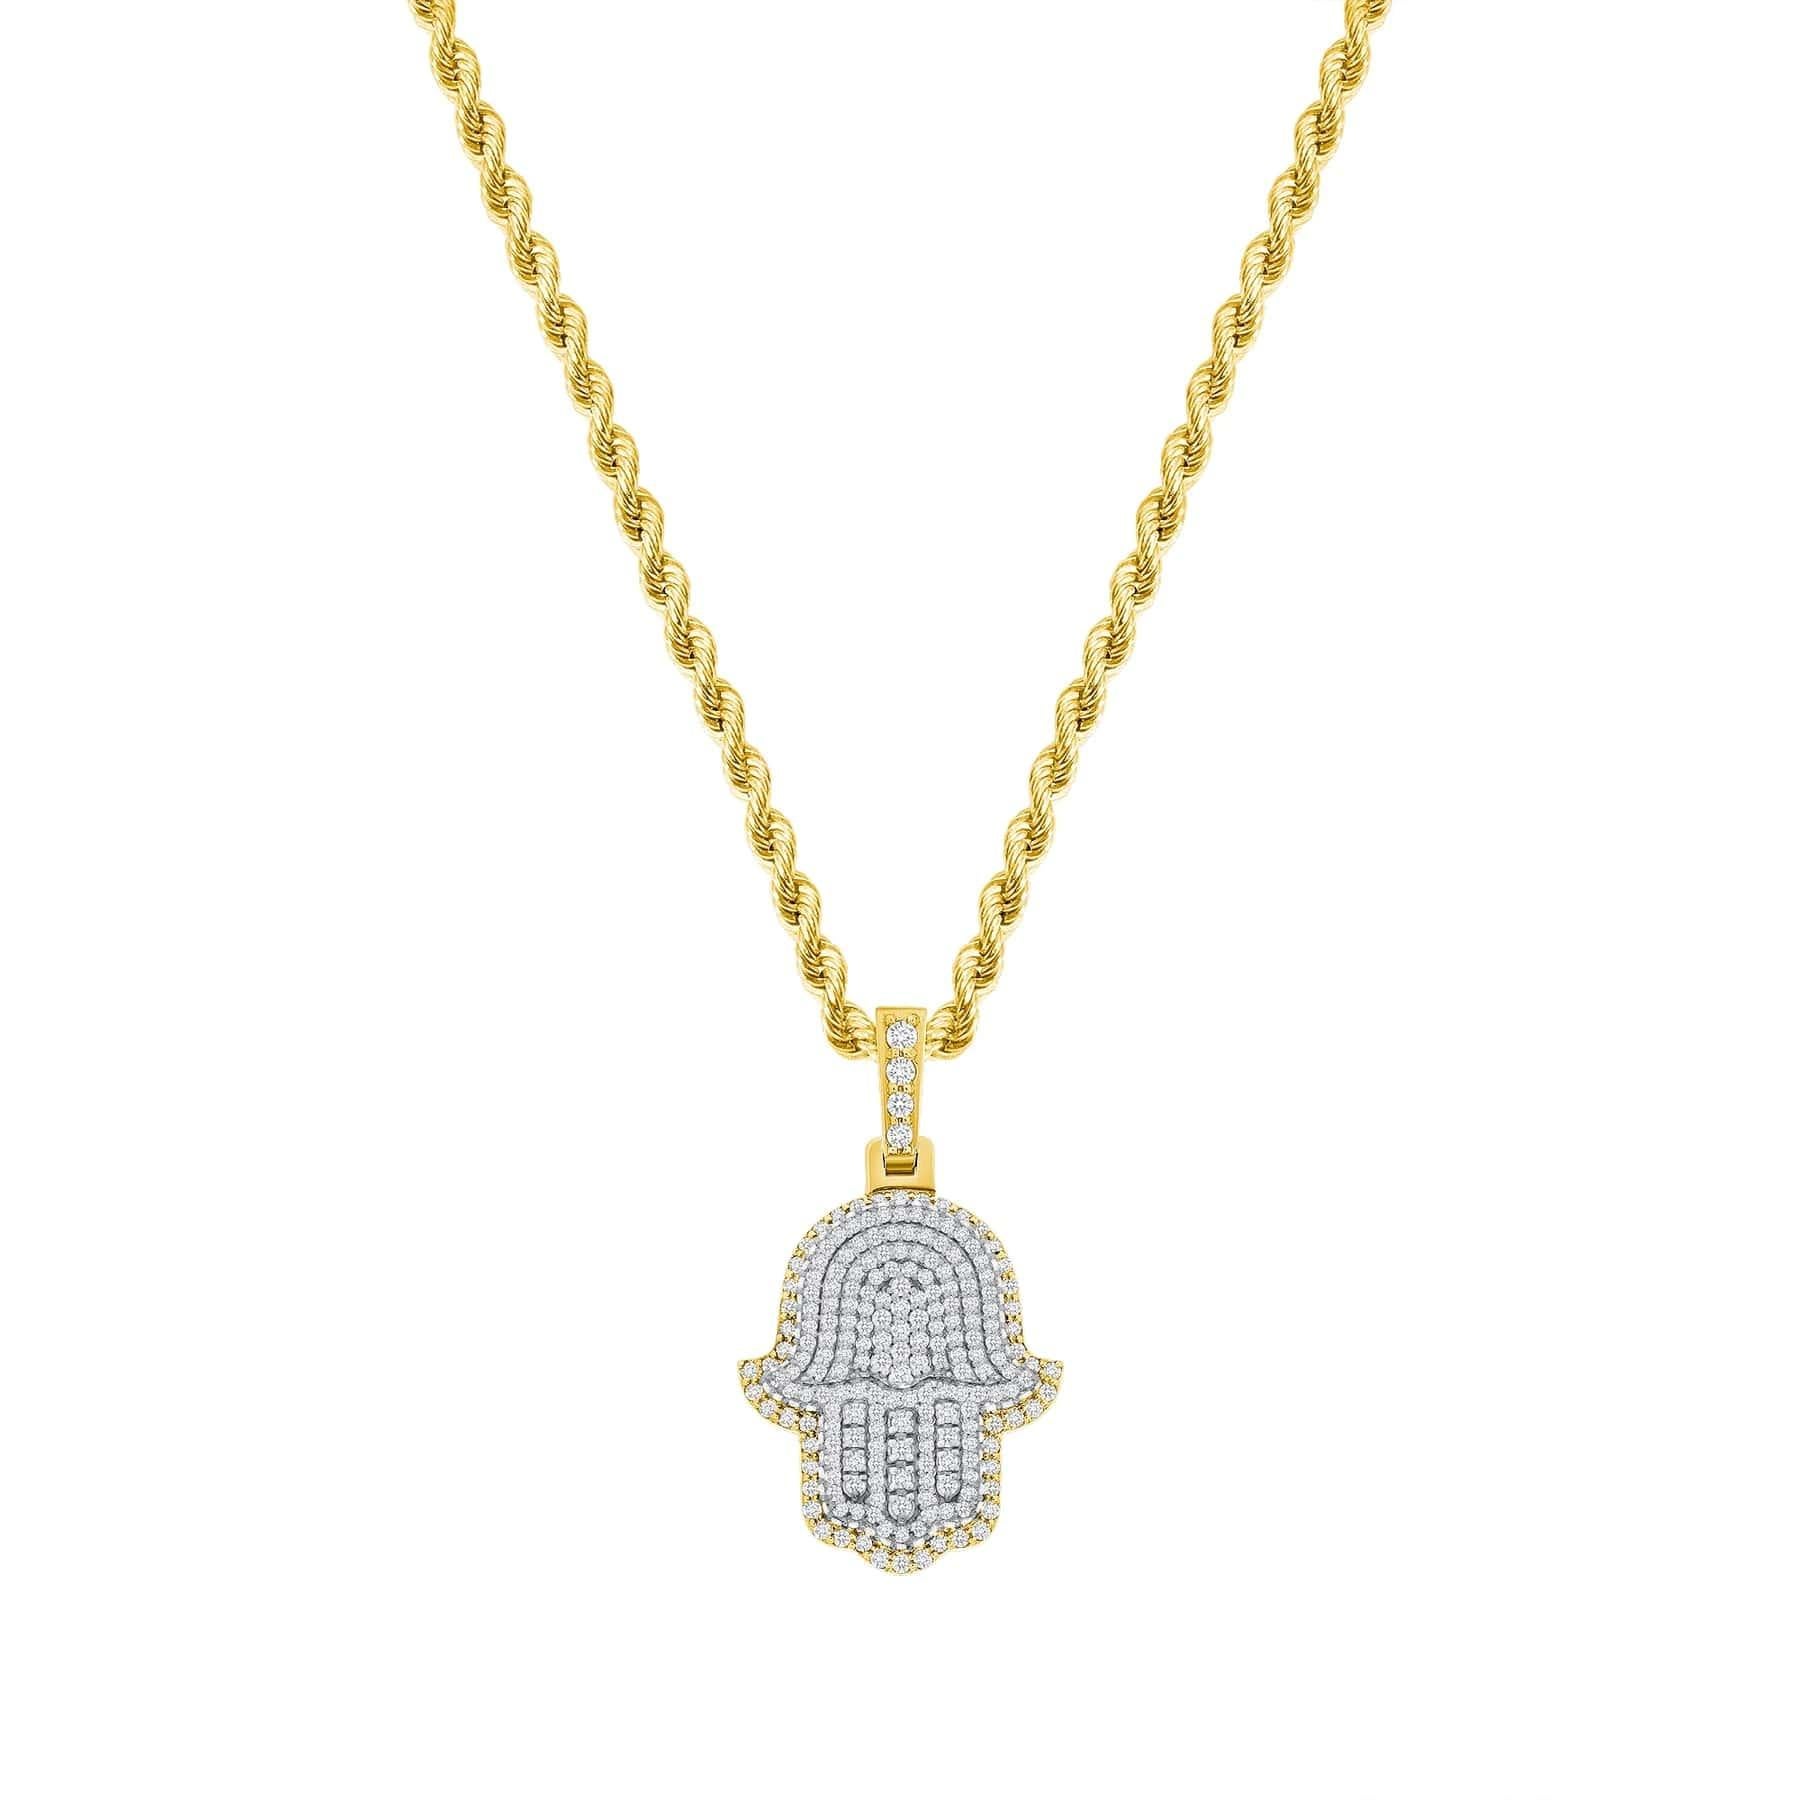 What is a Hamsa necklace?